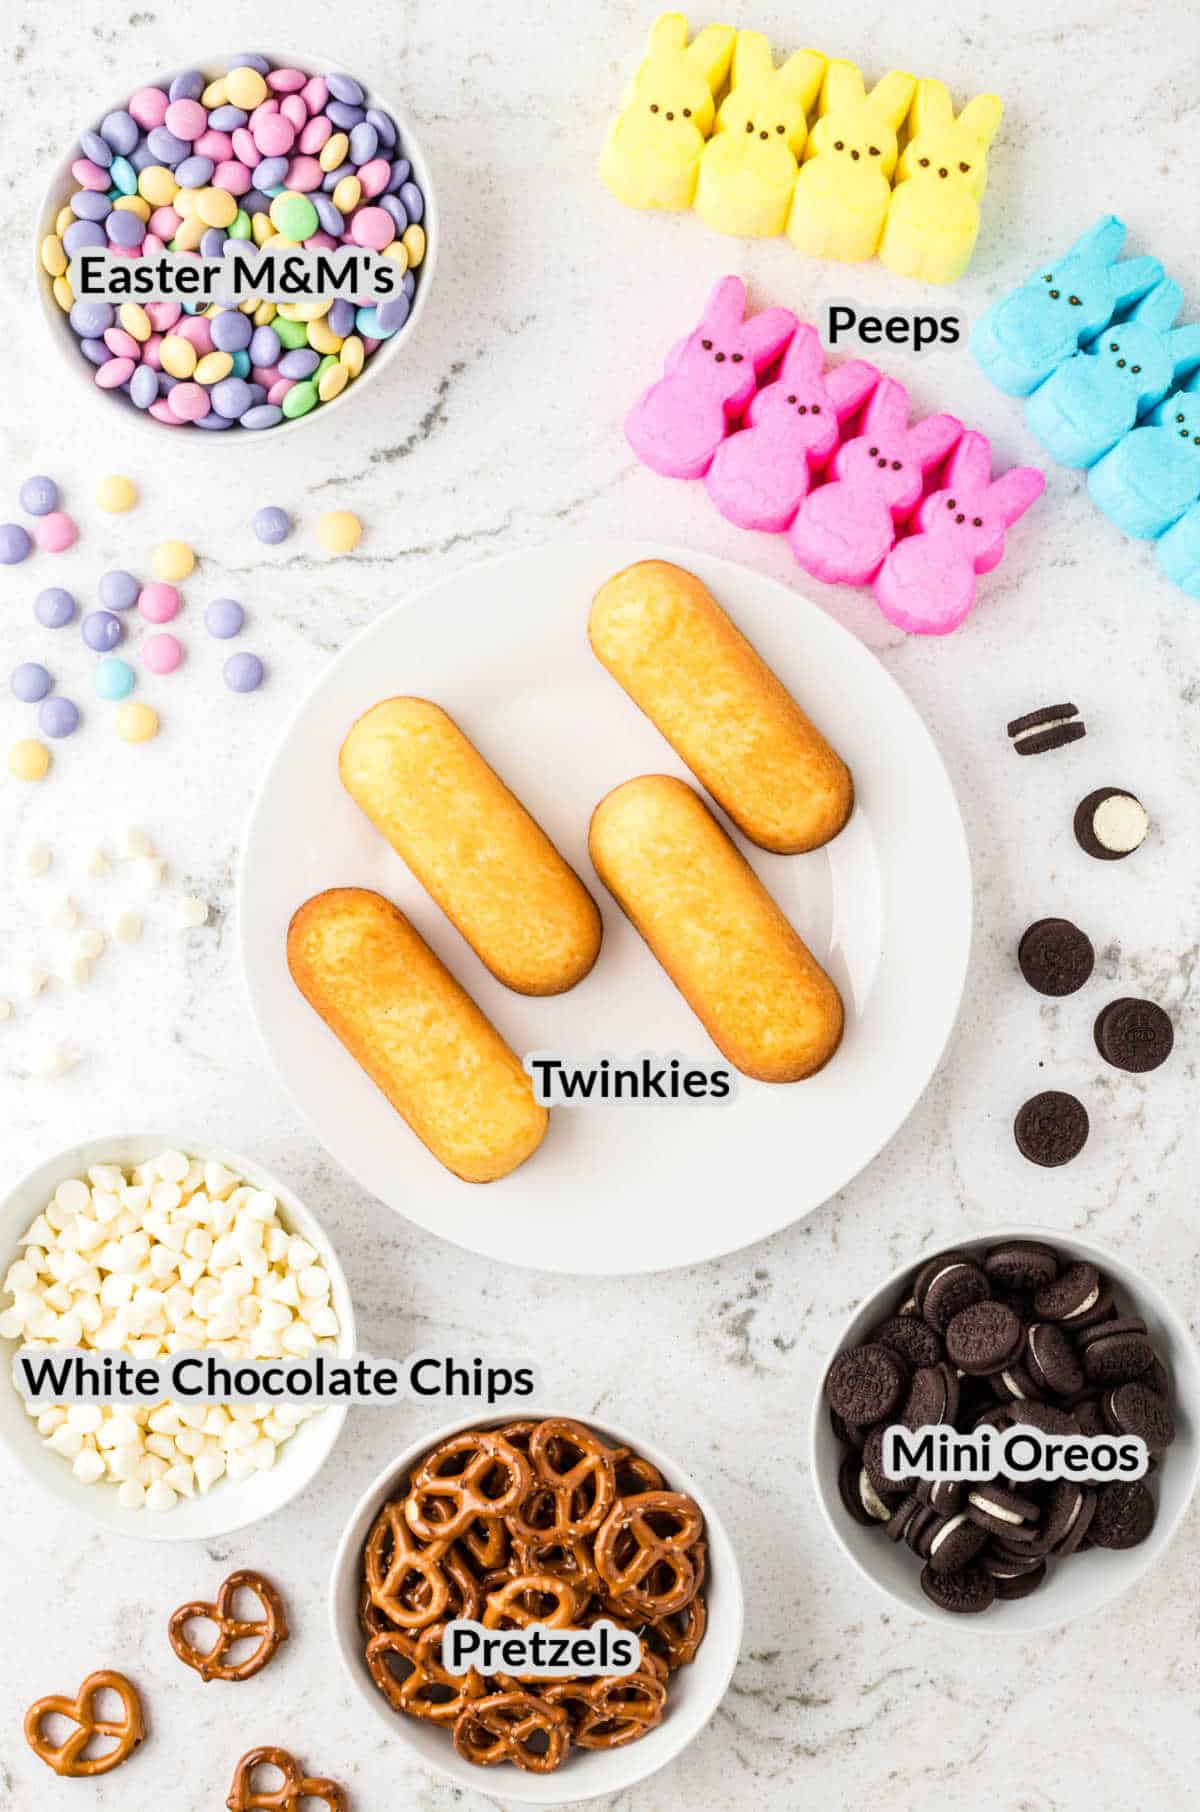 Overhead Image of the Twinkie Bunny Car Supplies